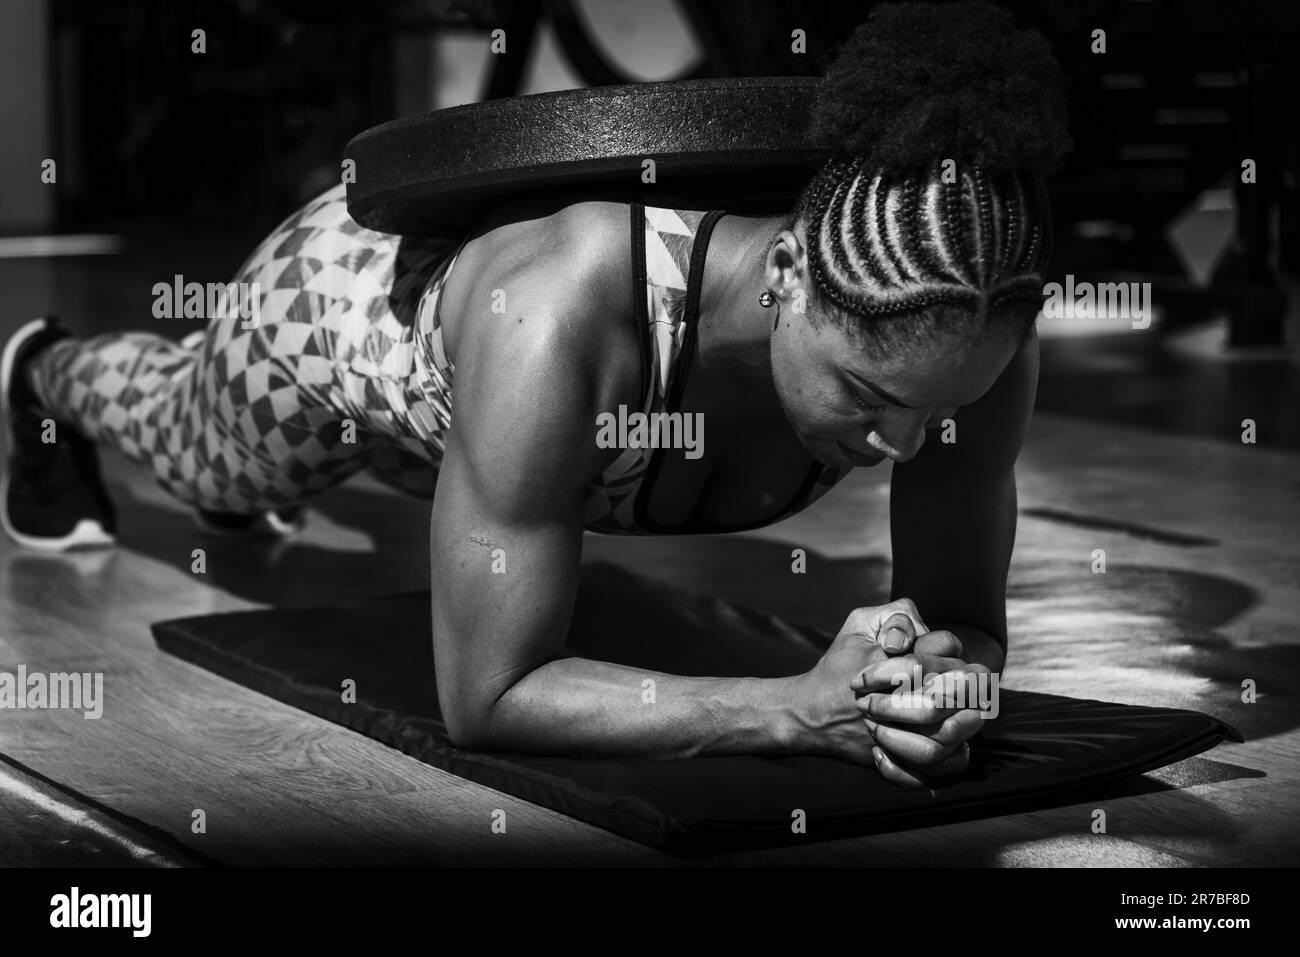 An athletic female fitness enthusiast engaging in a weighted planking exercise, demonstrating strength, balance, and determination Stock Photo